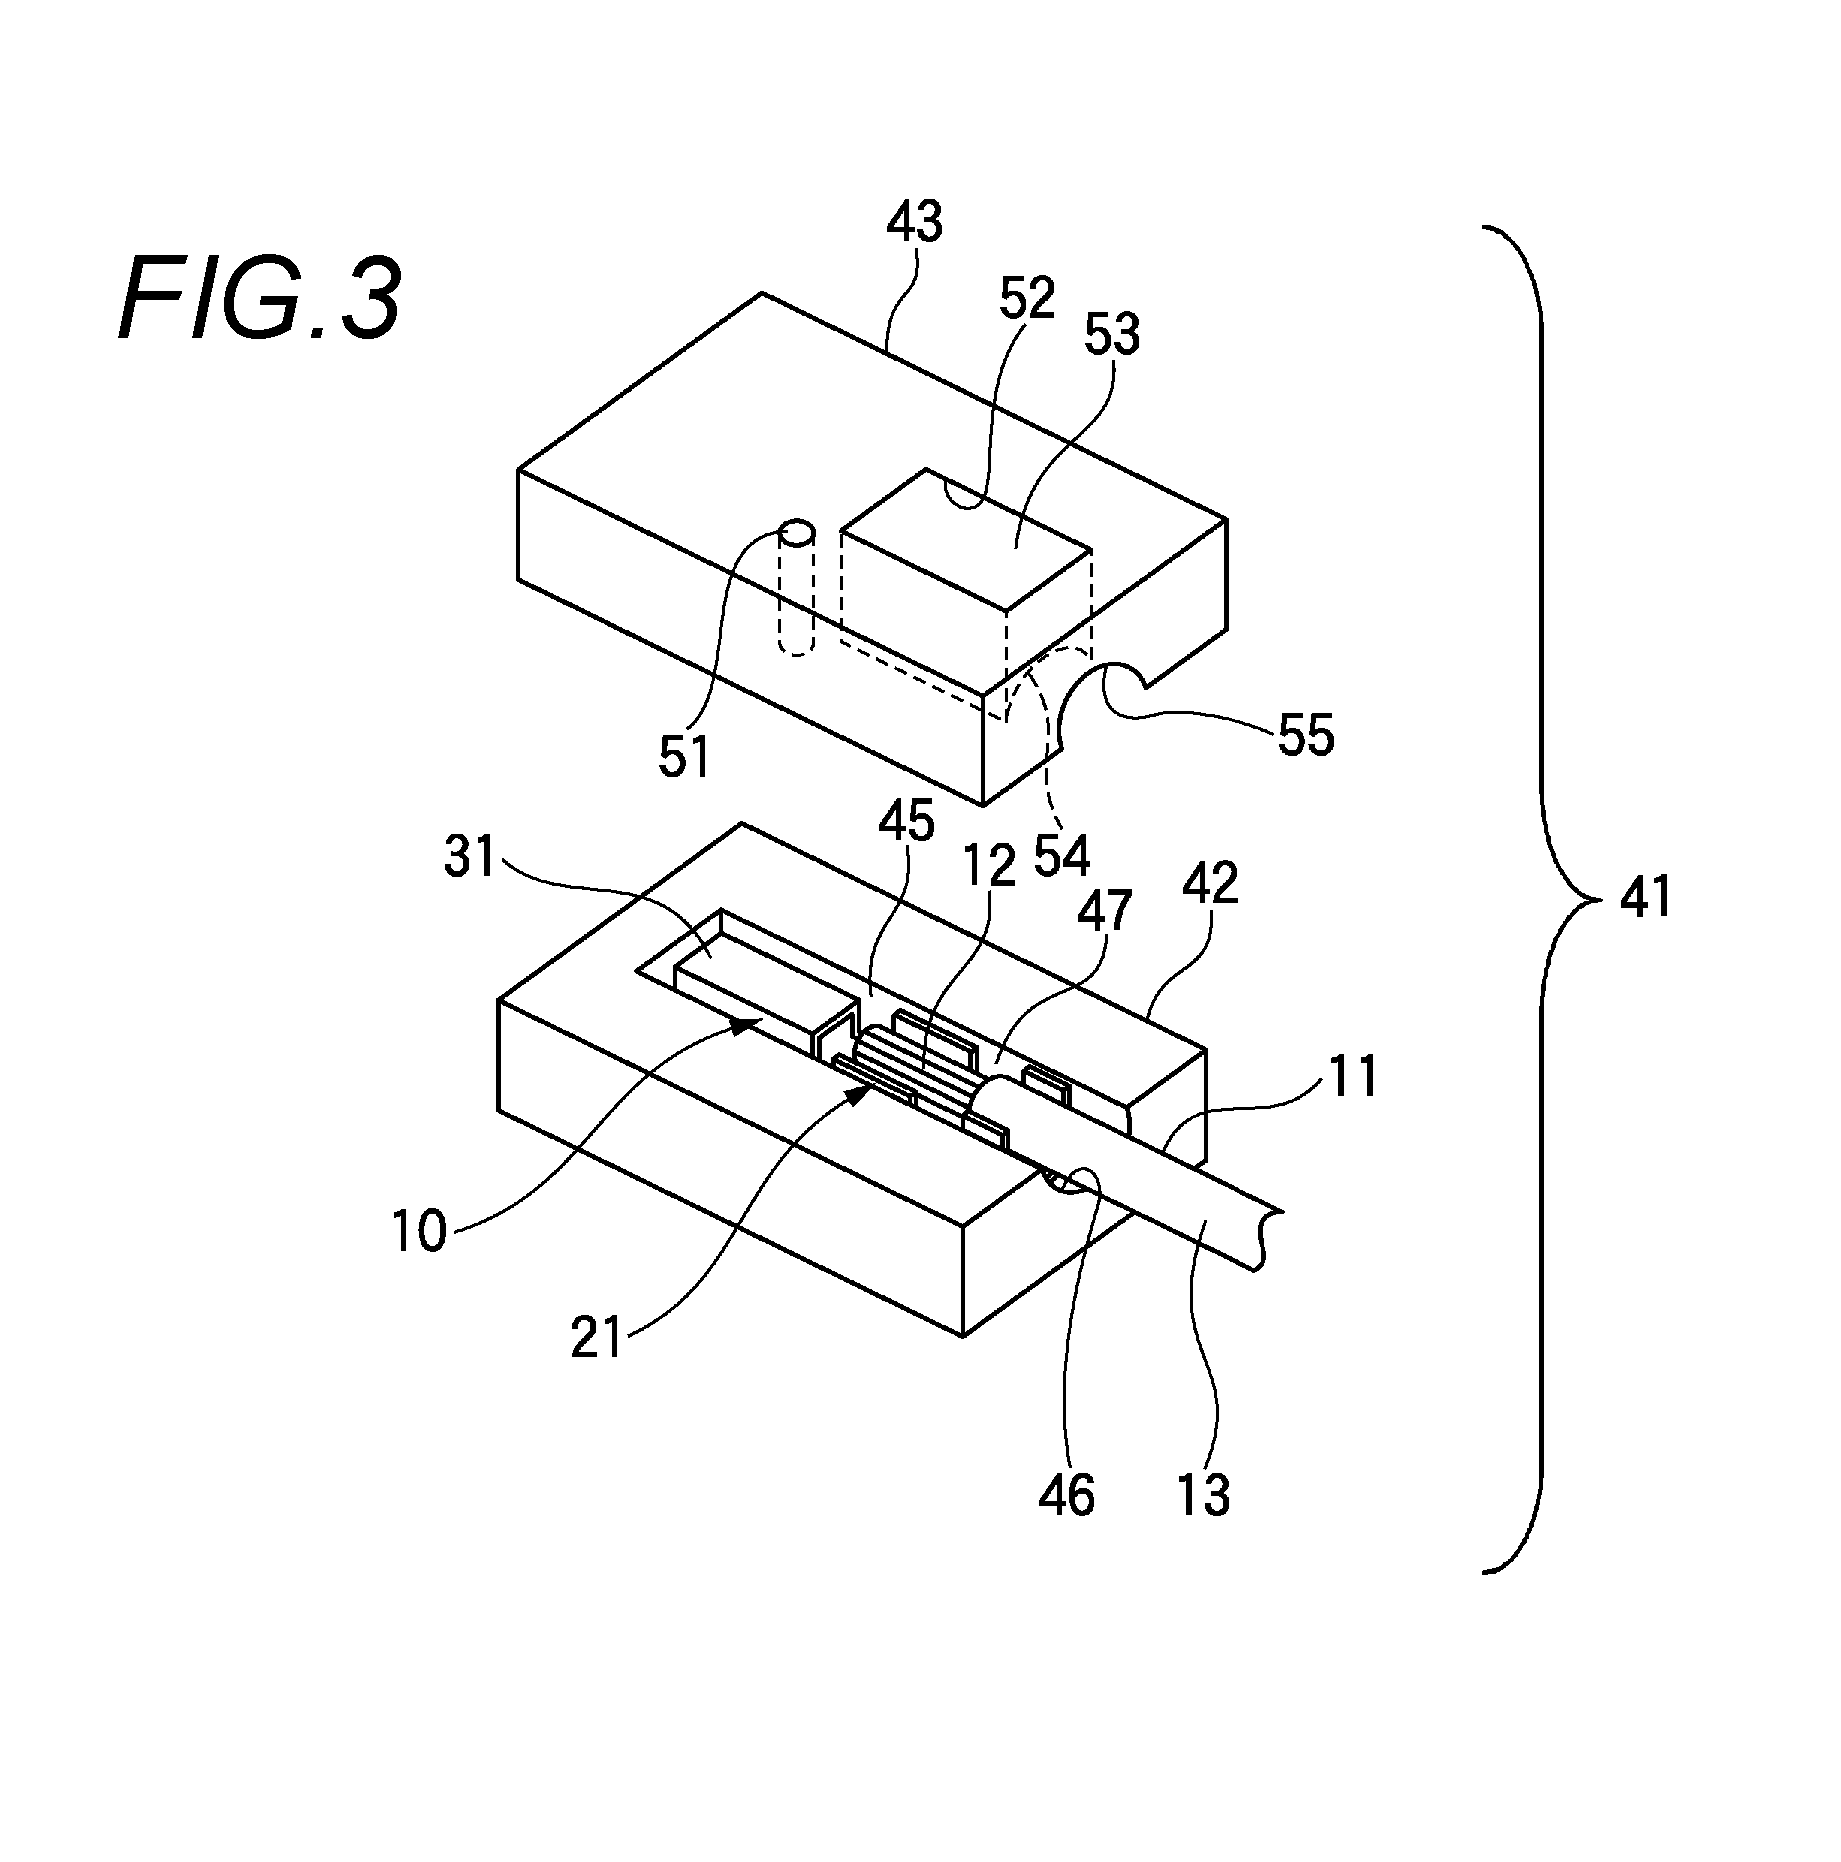 Method of connecting electric cable to connector terminal and compression-molding die